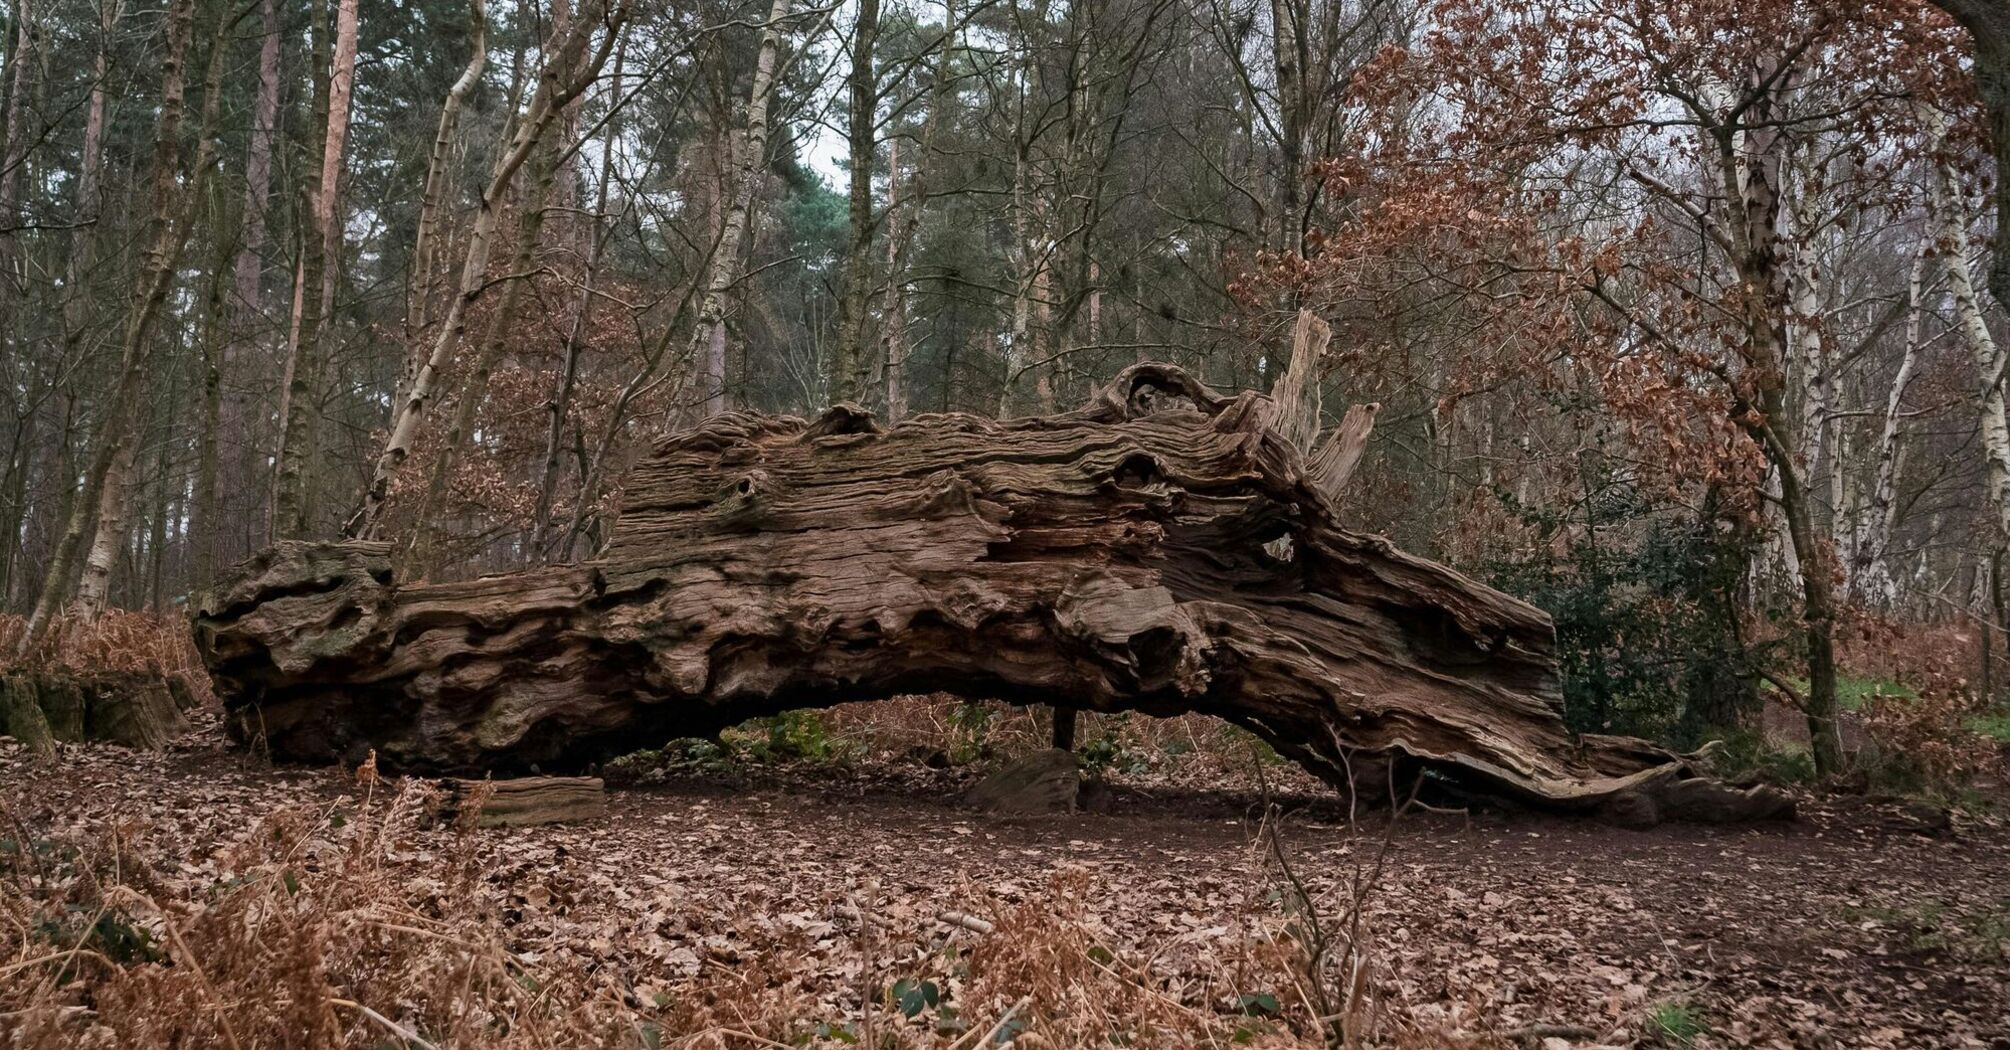 A fallen tree in the middle of a forest